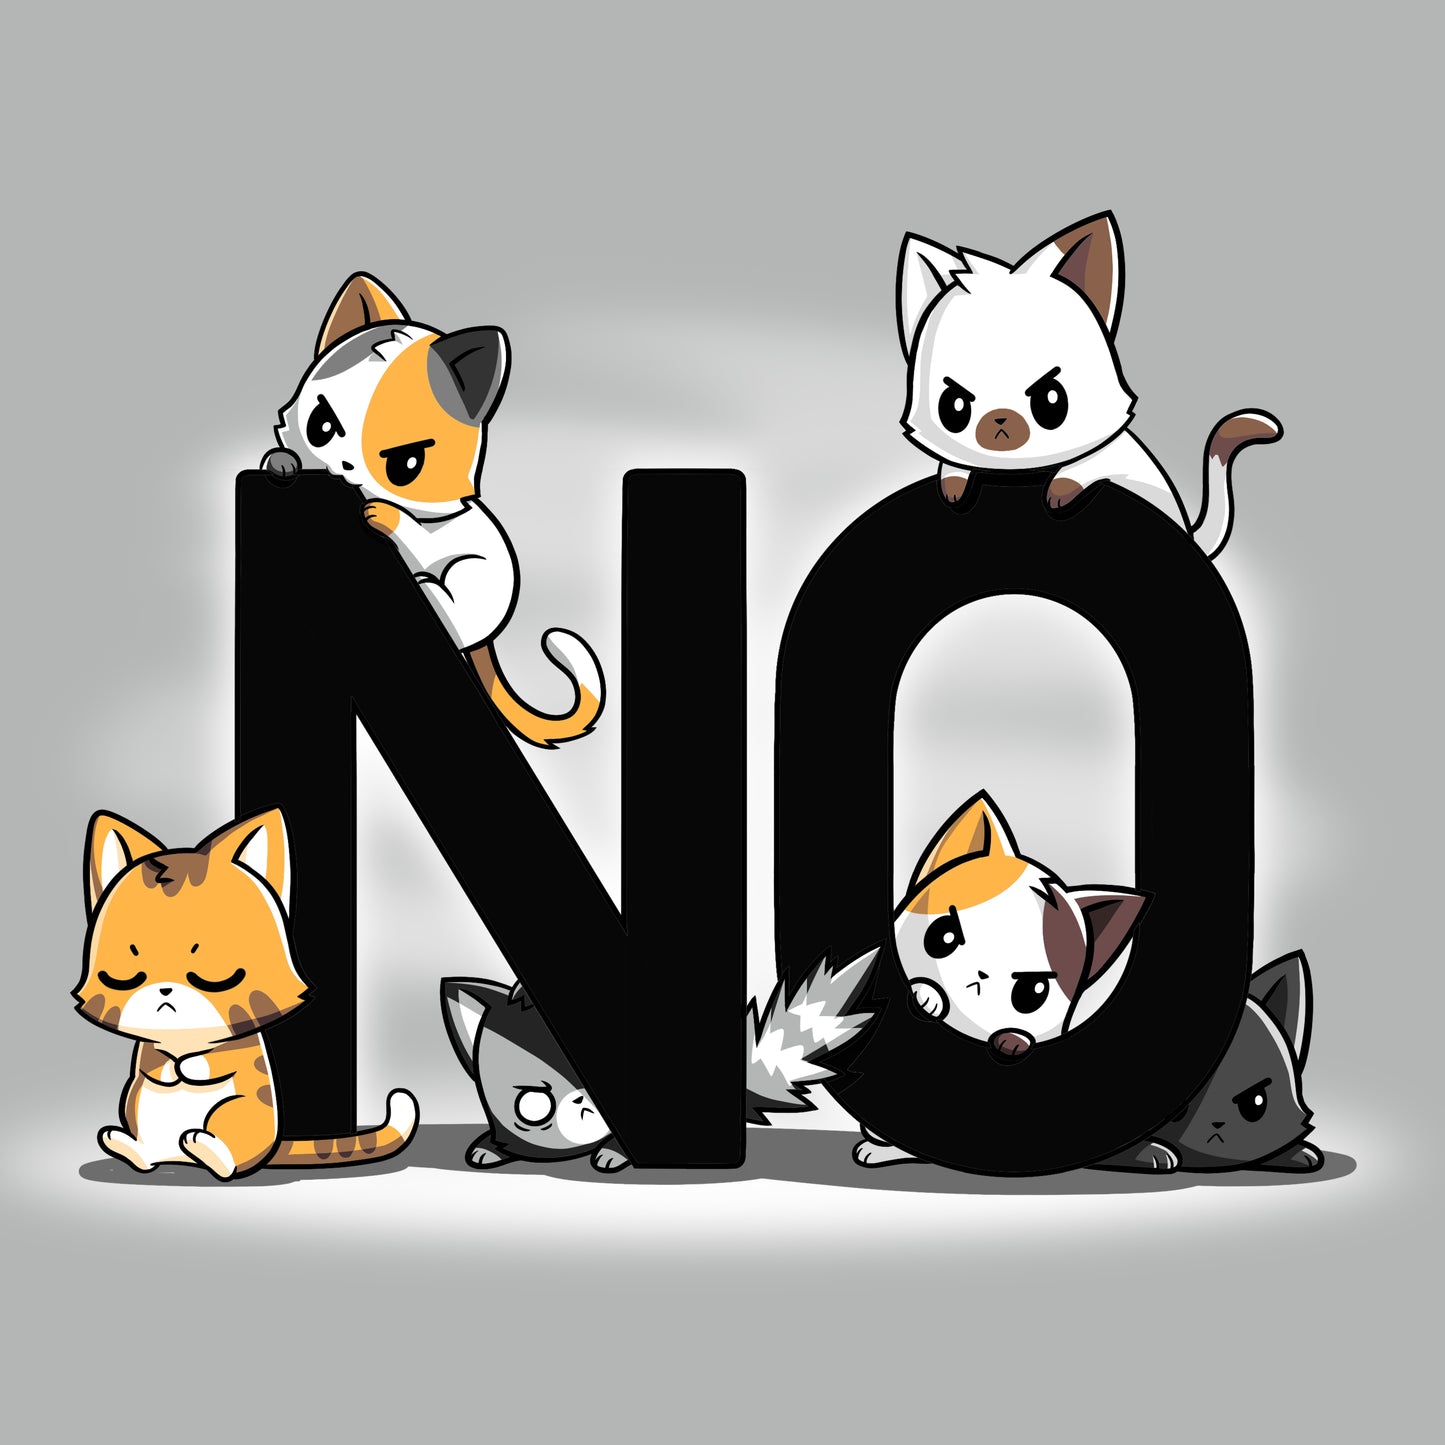 A group of grumpy cats sitting around a letter 'no' on a Bad Cattitude t-shirt from TeeTurtle.